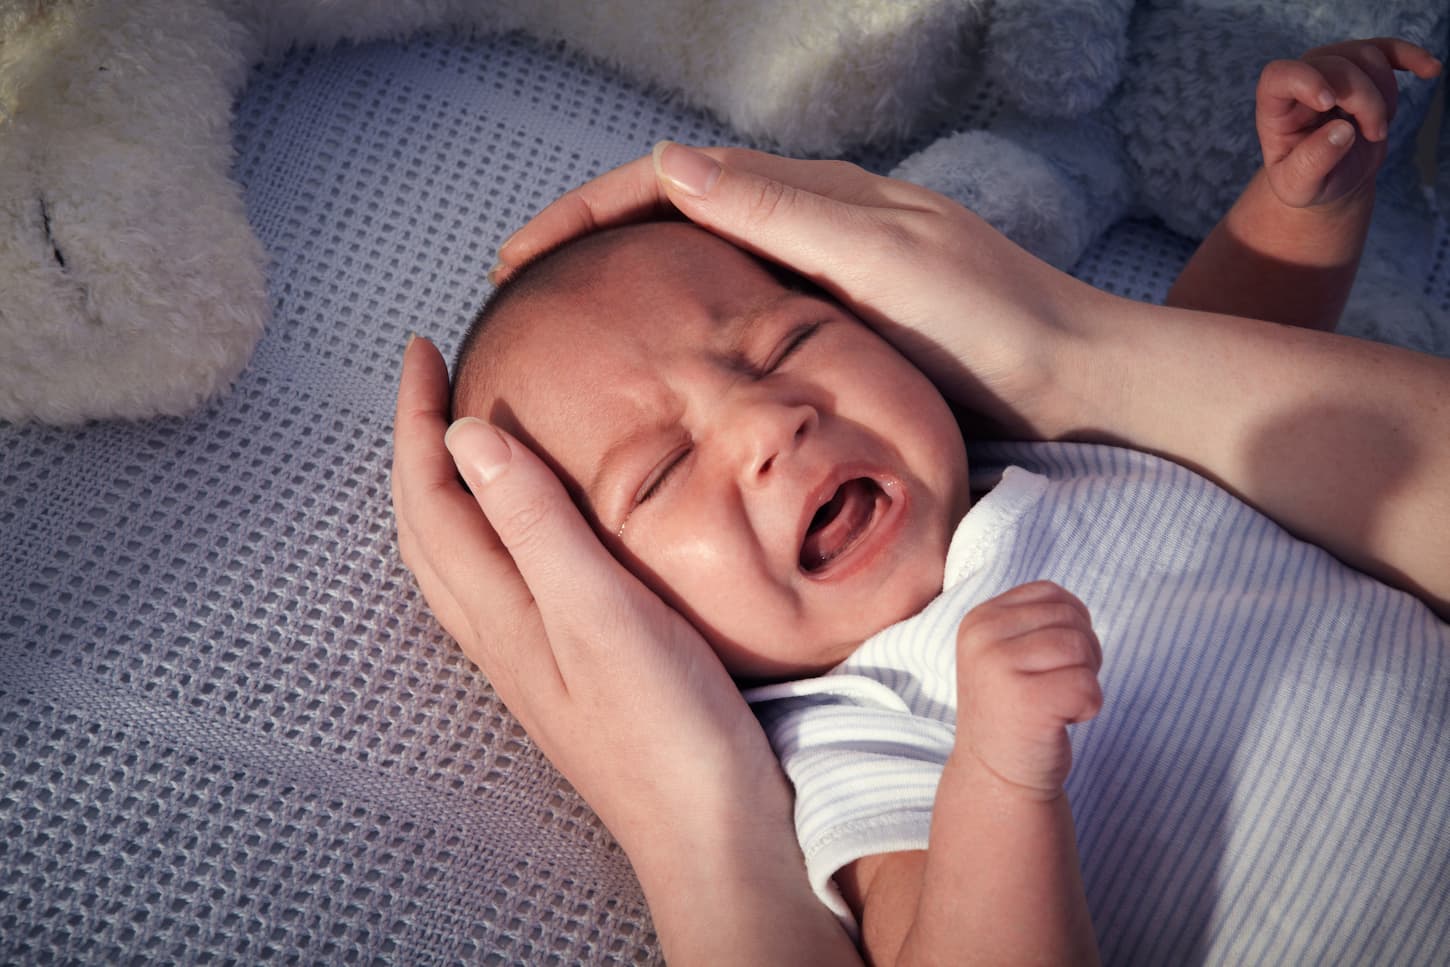 An image of a baby boy crying in his crib before going to bed.